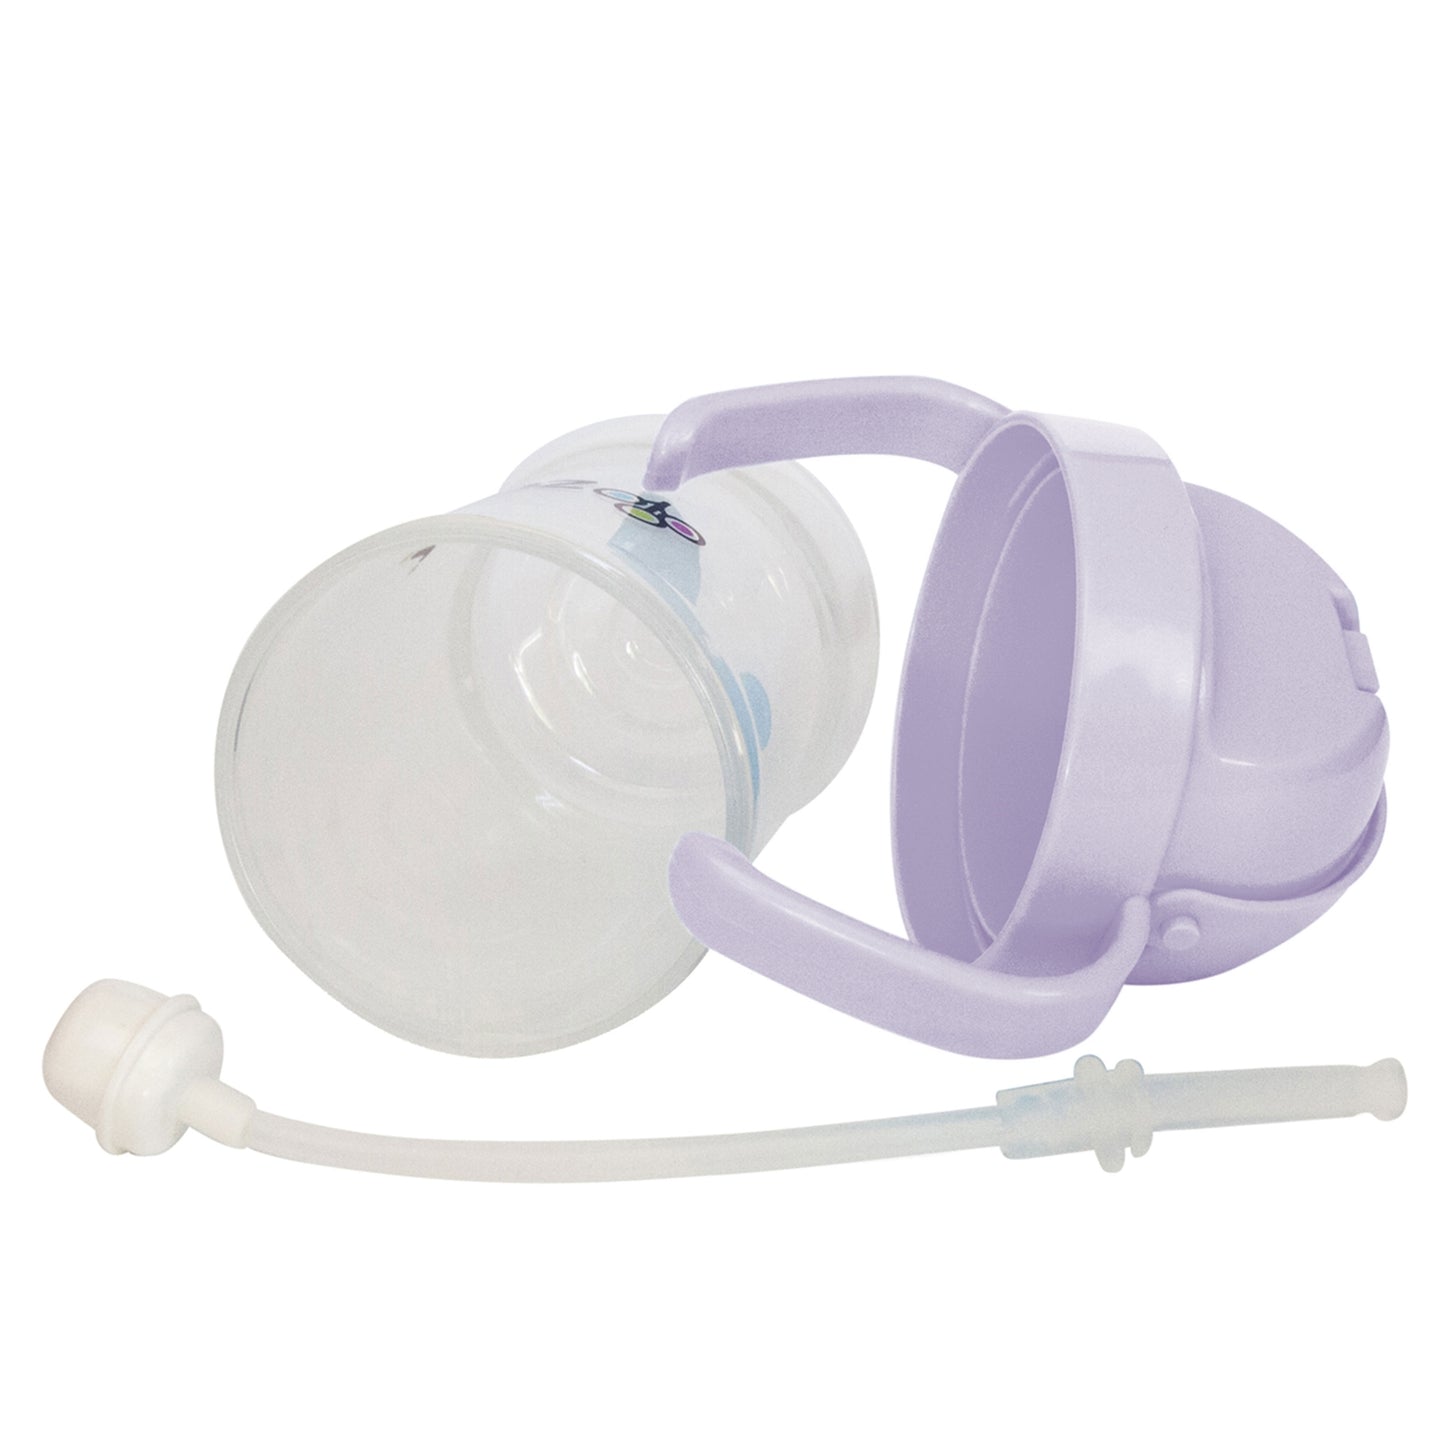 Bot weighted straw sippy cup - Lilac